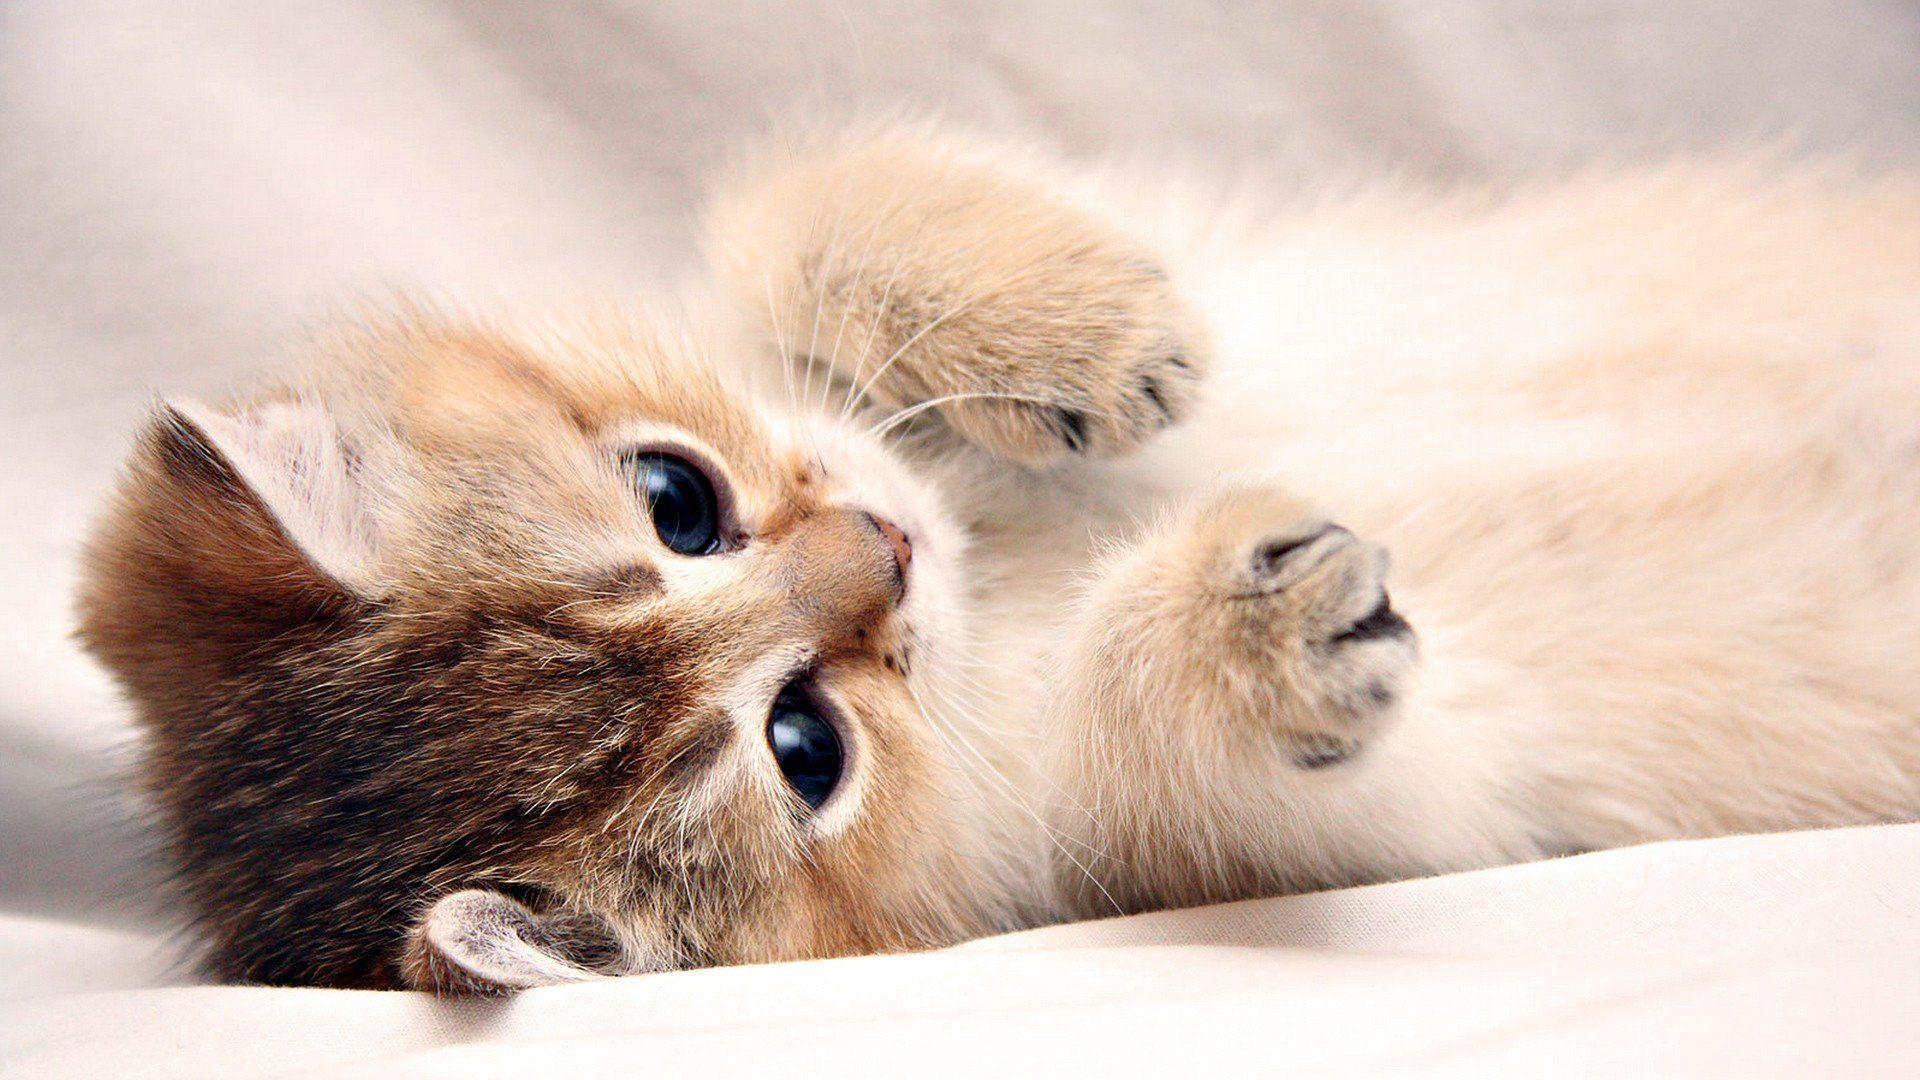 Full HD Wallpapers Of Cute Cats For Dell Laptop - Wallpaper Cave